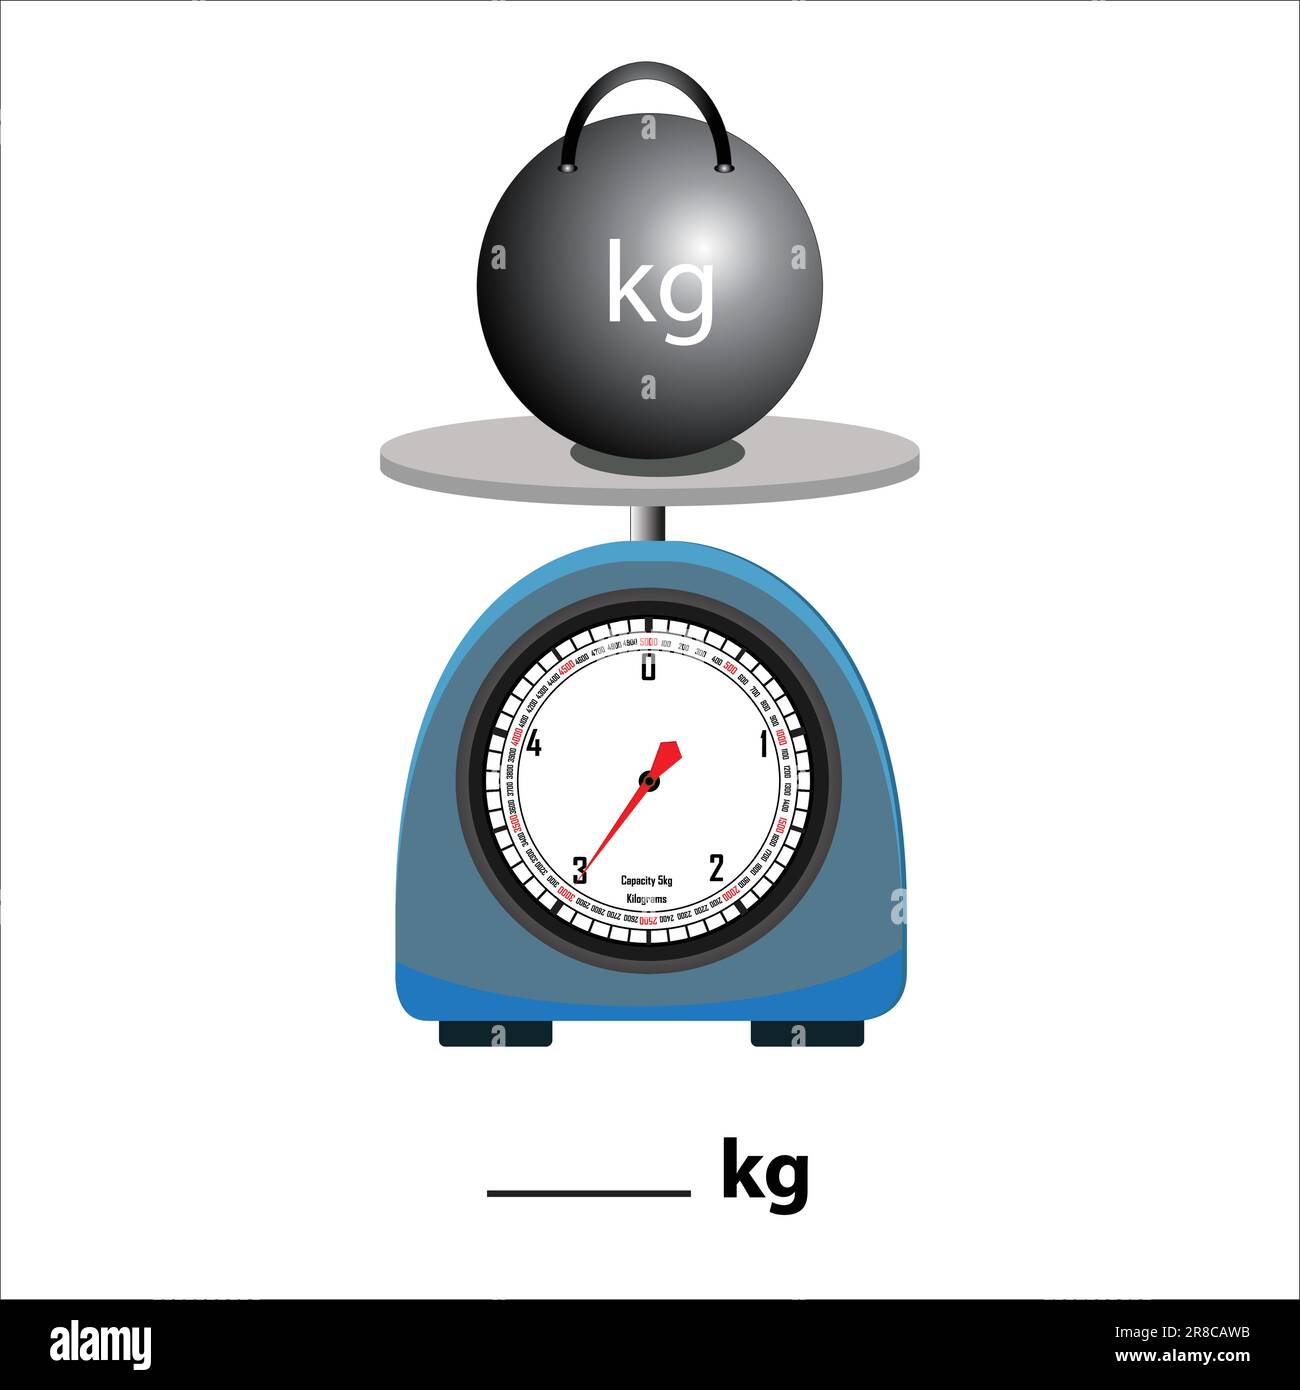 iron ball 3kg on a weighing scale, isolate on white background. Weight balance vector illustration. Equilibrium comparison sign business concept. Stock Vector